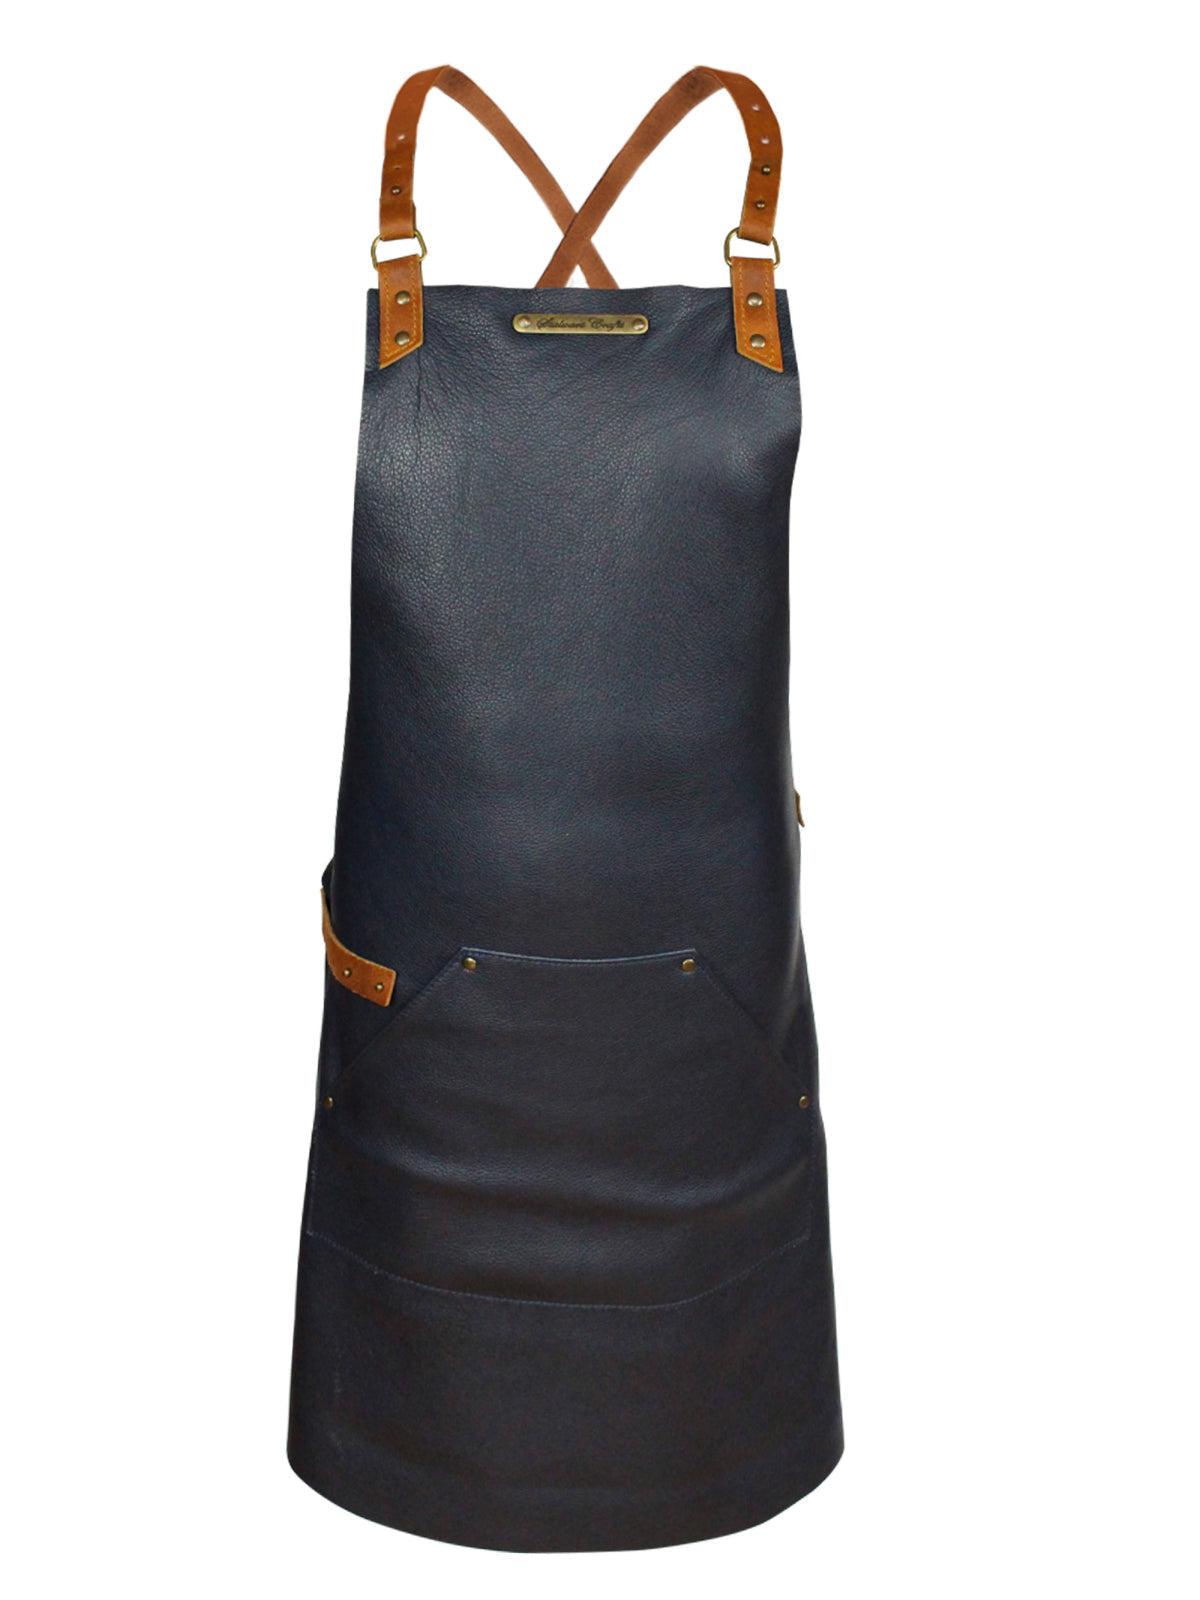 Leather Apron Cross Strap Deluxe Marine by STW -  ChefsCotton